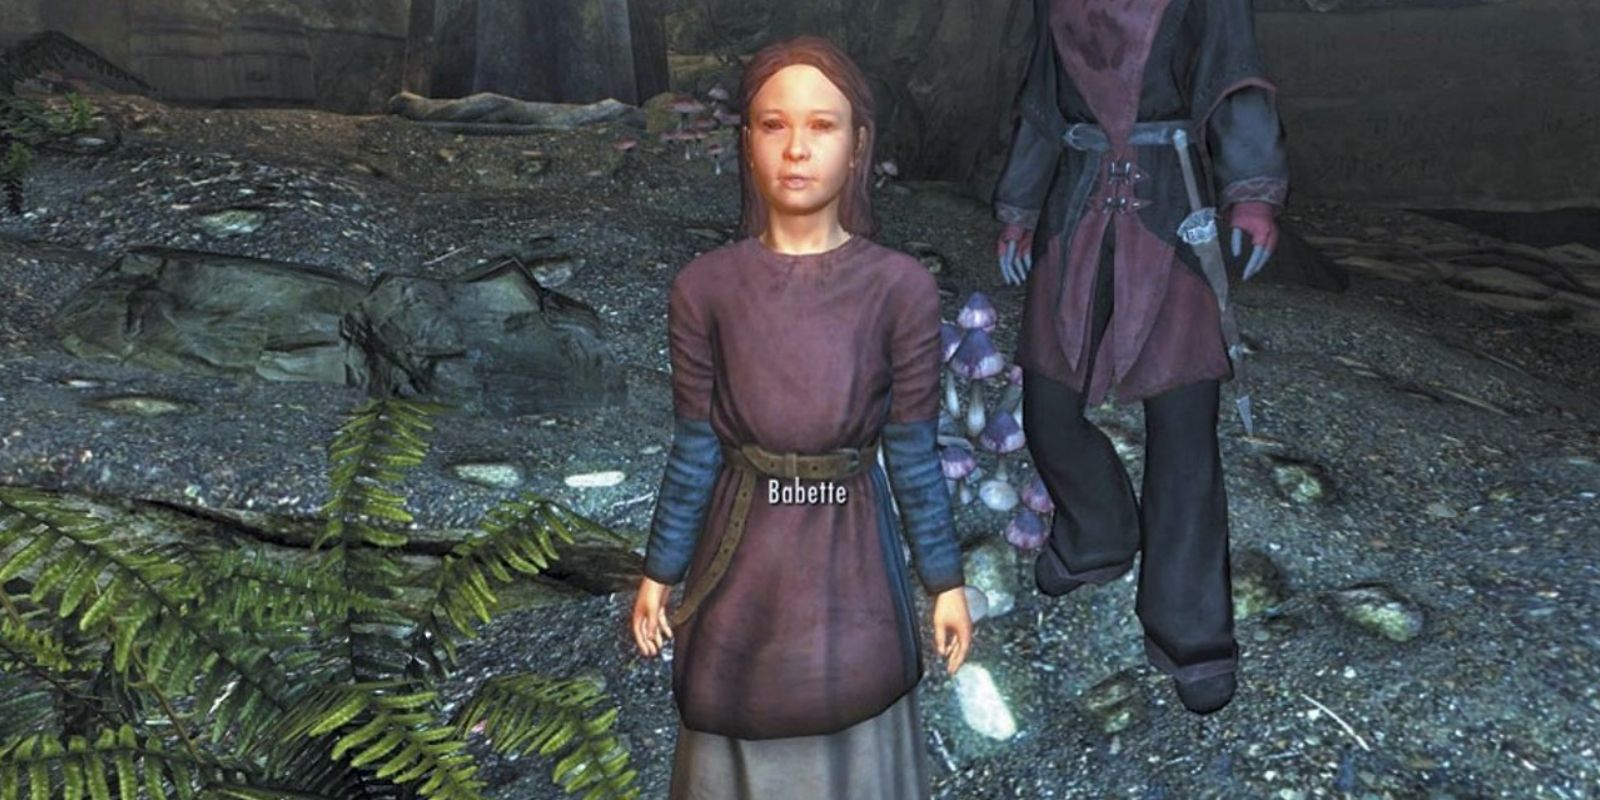 An image of Skyrim's Babette standing in the Falkreath Sanctuary.